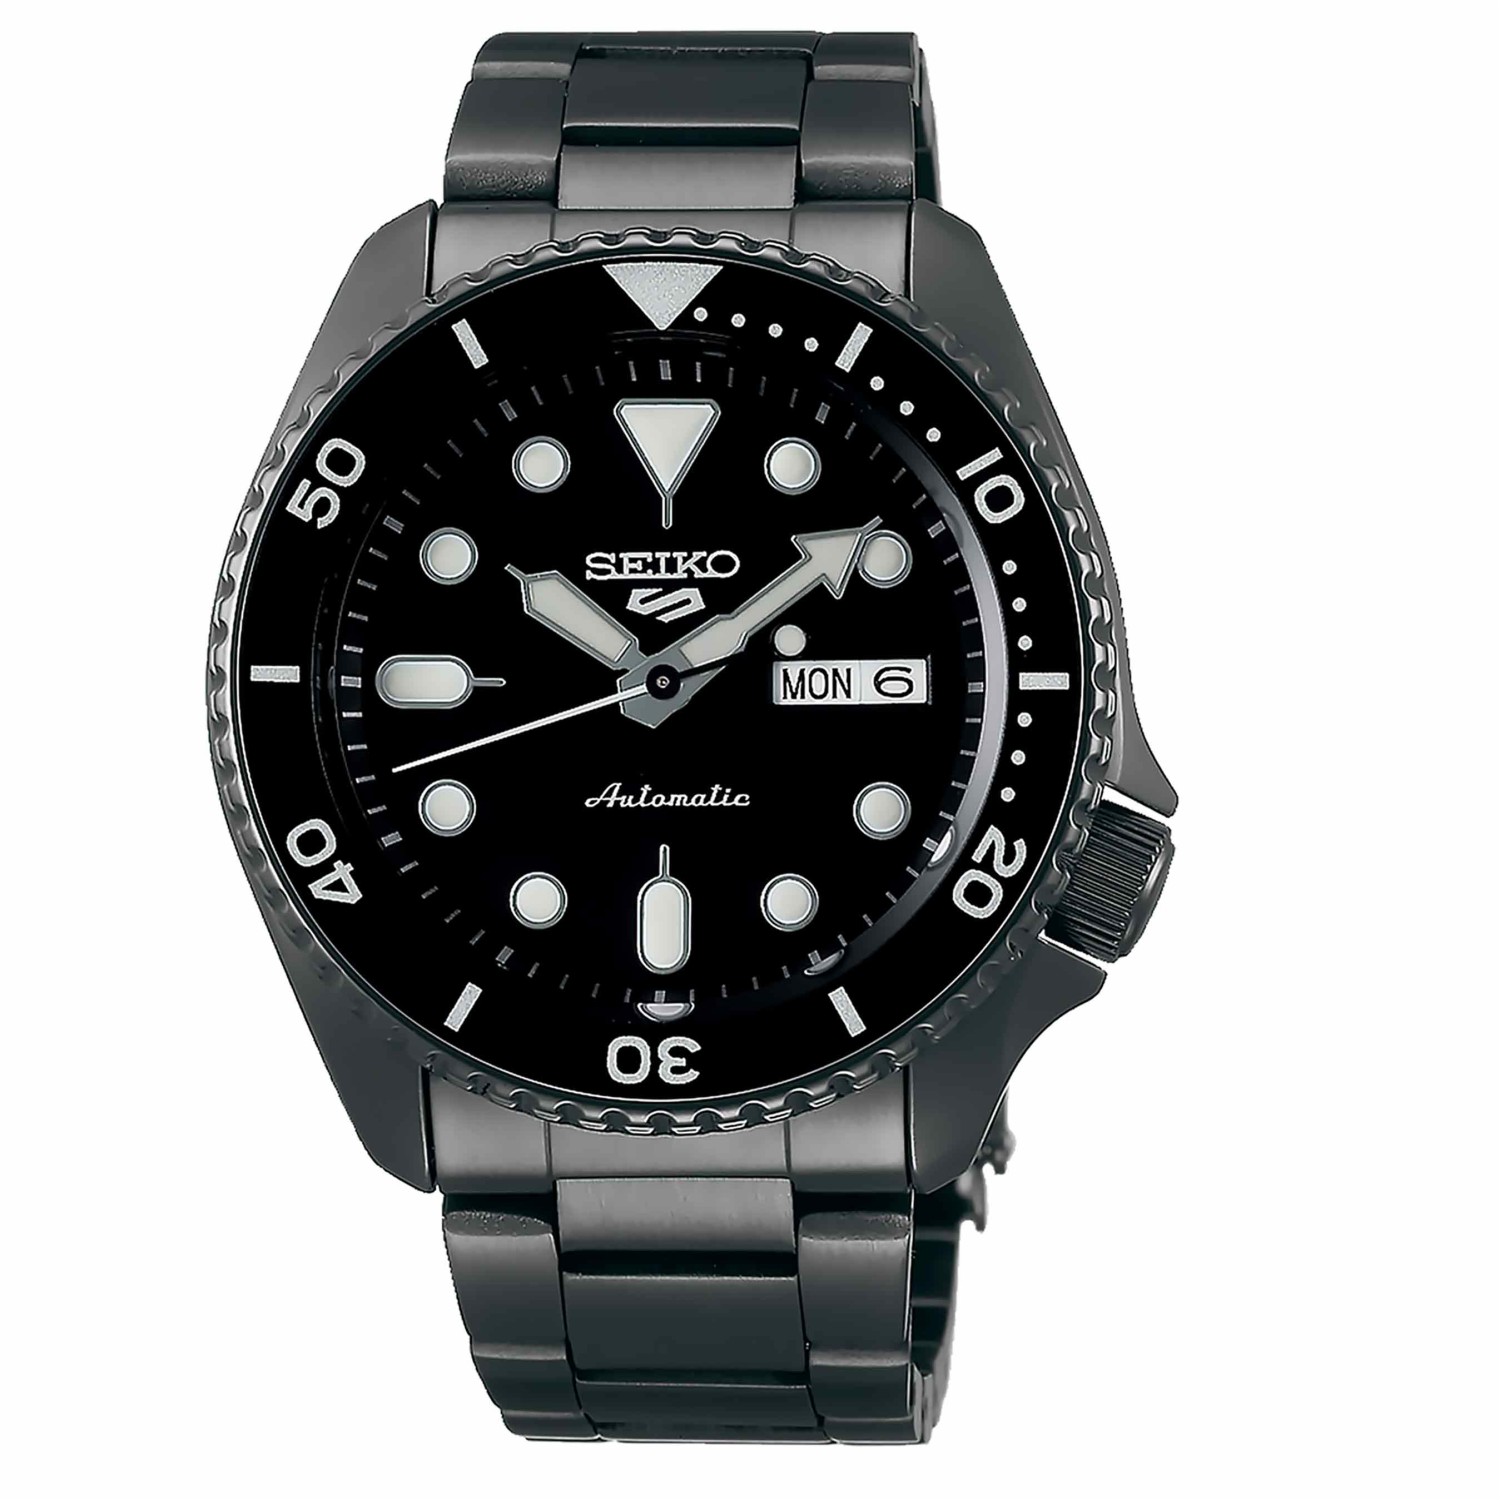 SRPD65K SEIKO 5 Mens Automatic Watch. Dark like midnight and with a brooding sense of style, the Seiko 5 SRPD65 is a versatile men’s divers style timepiece. Both the 100m water resistant case and bracelet are forged from stainless steel and hard-coated to